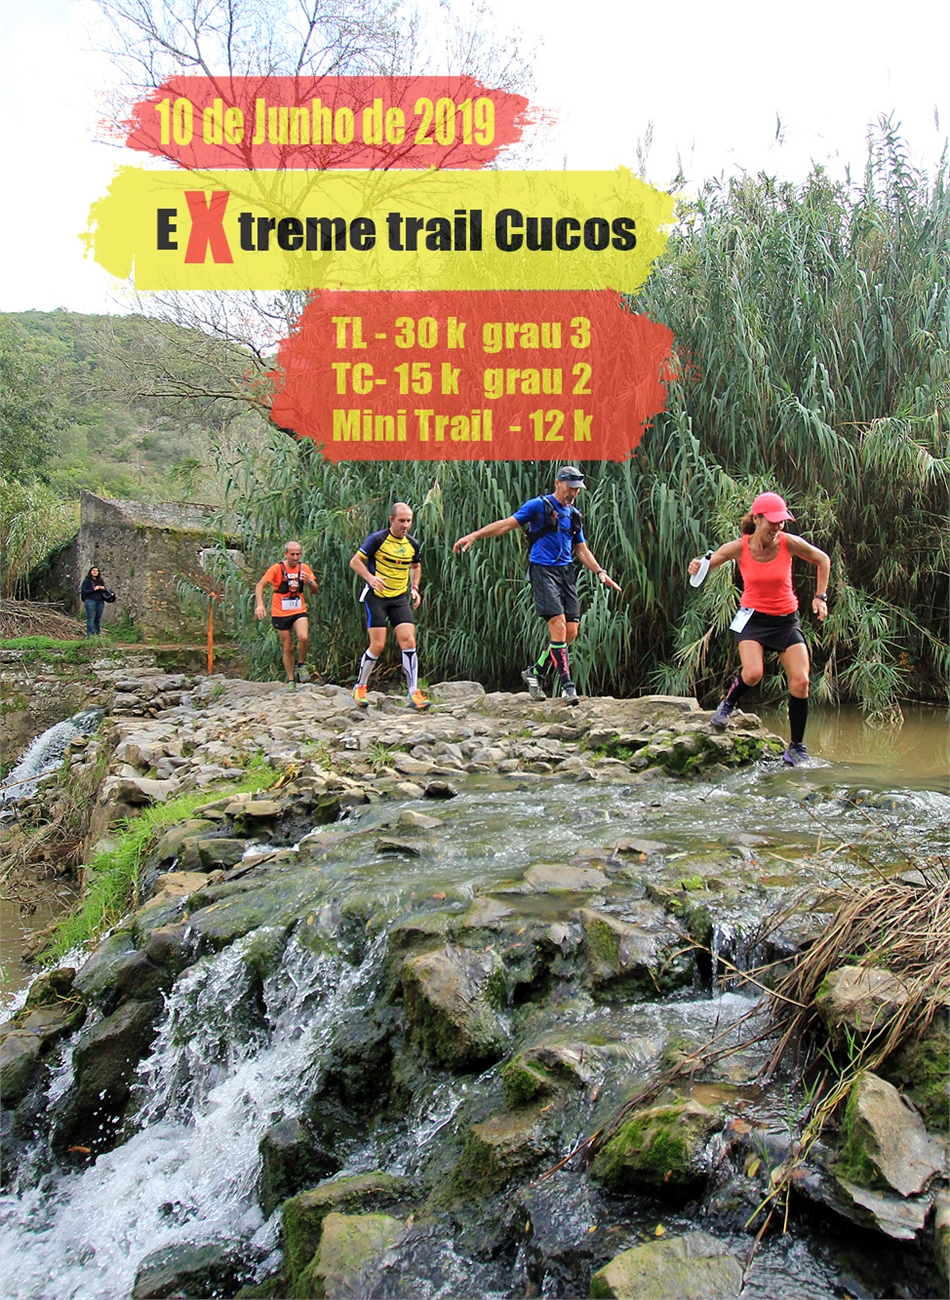 EXtreme Trail Cucos  - Eventos - TurresEvents